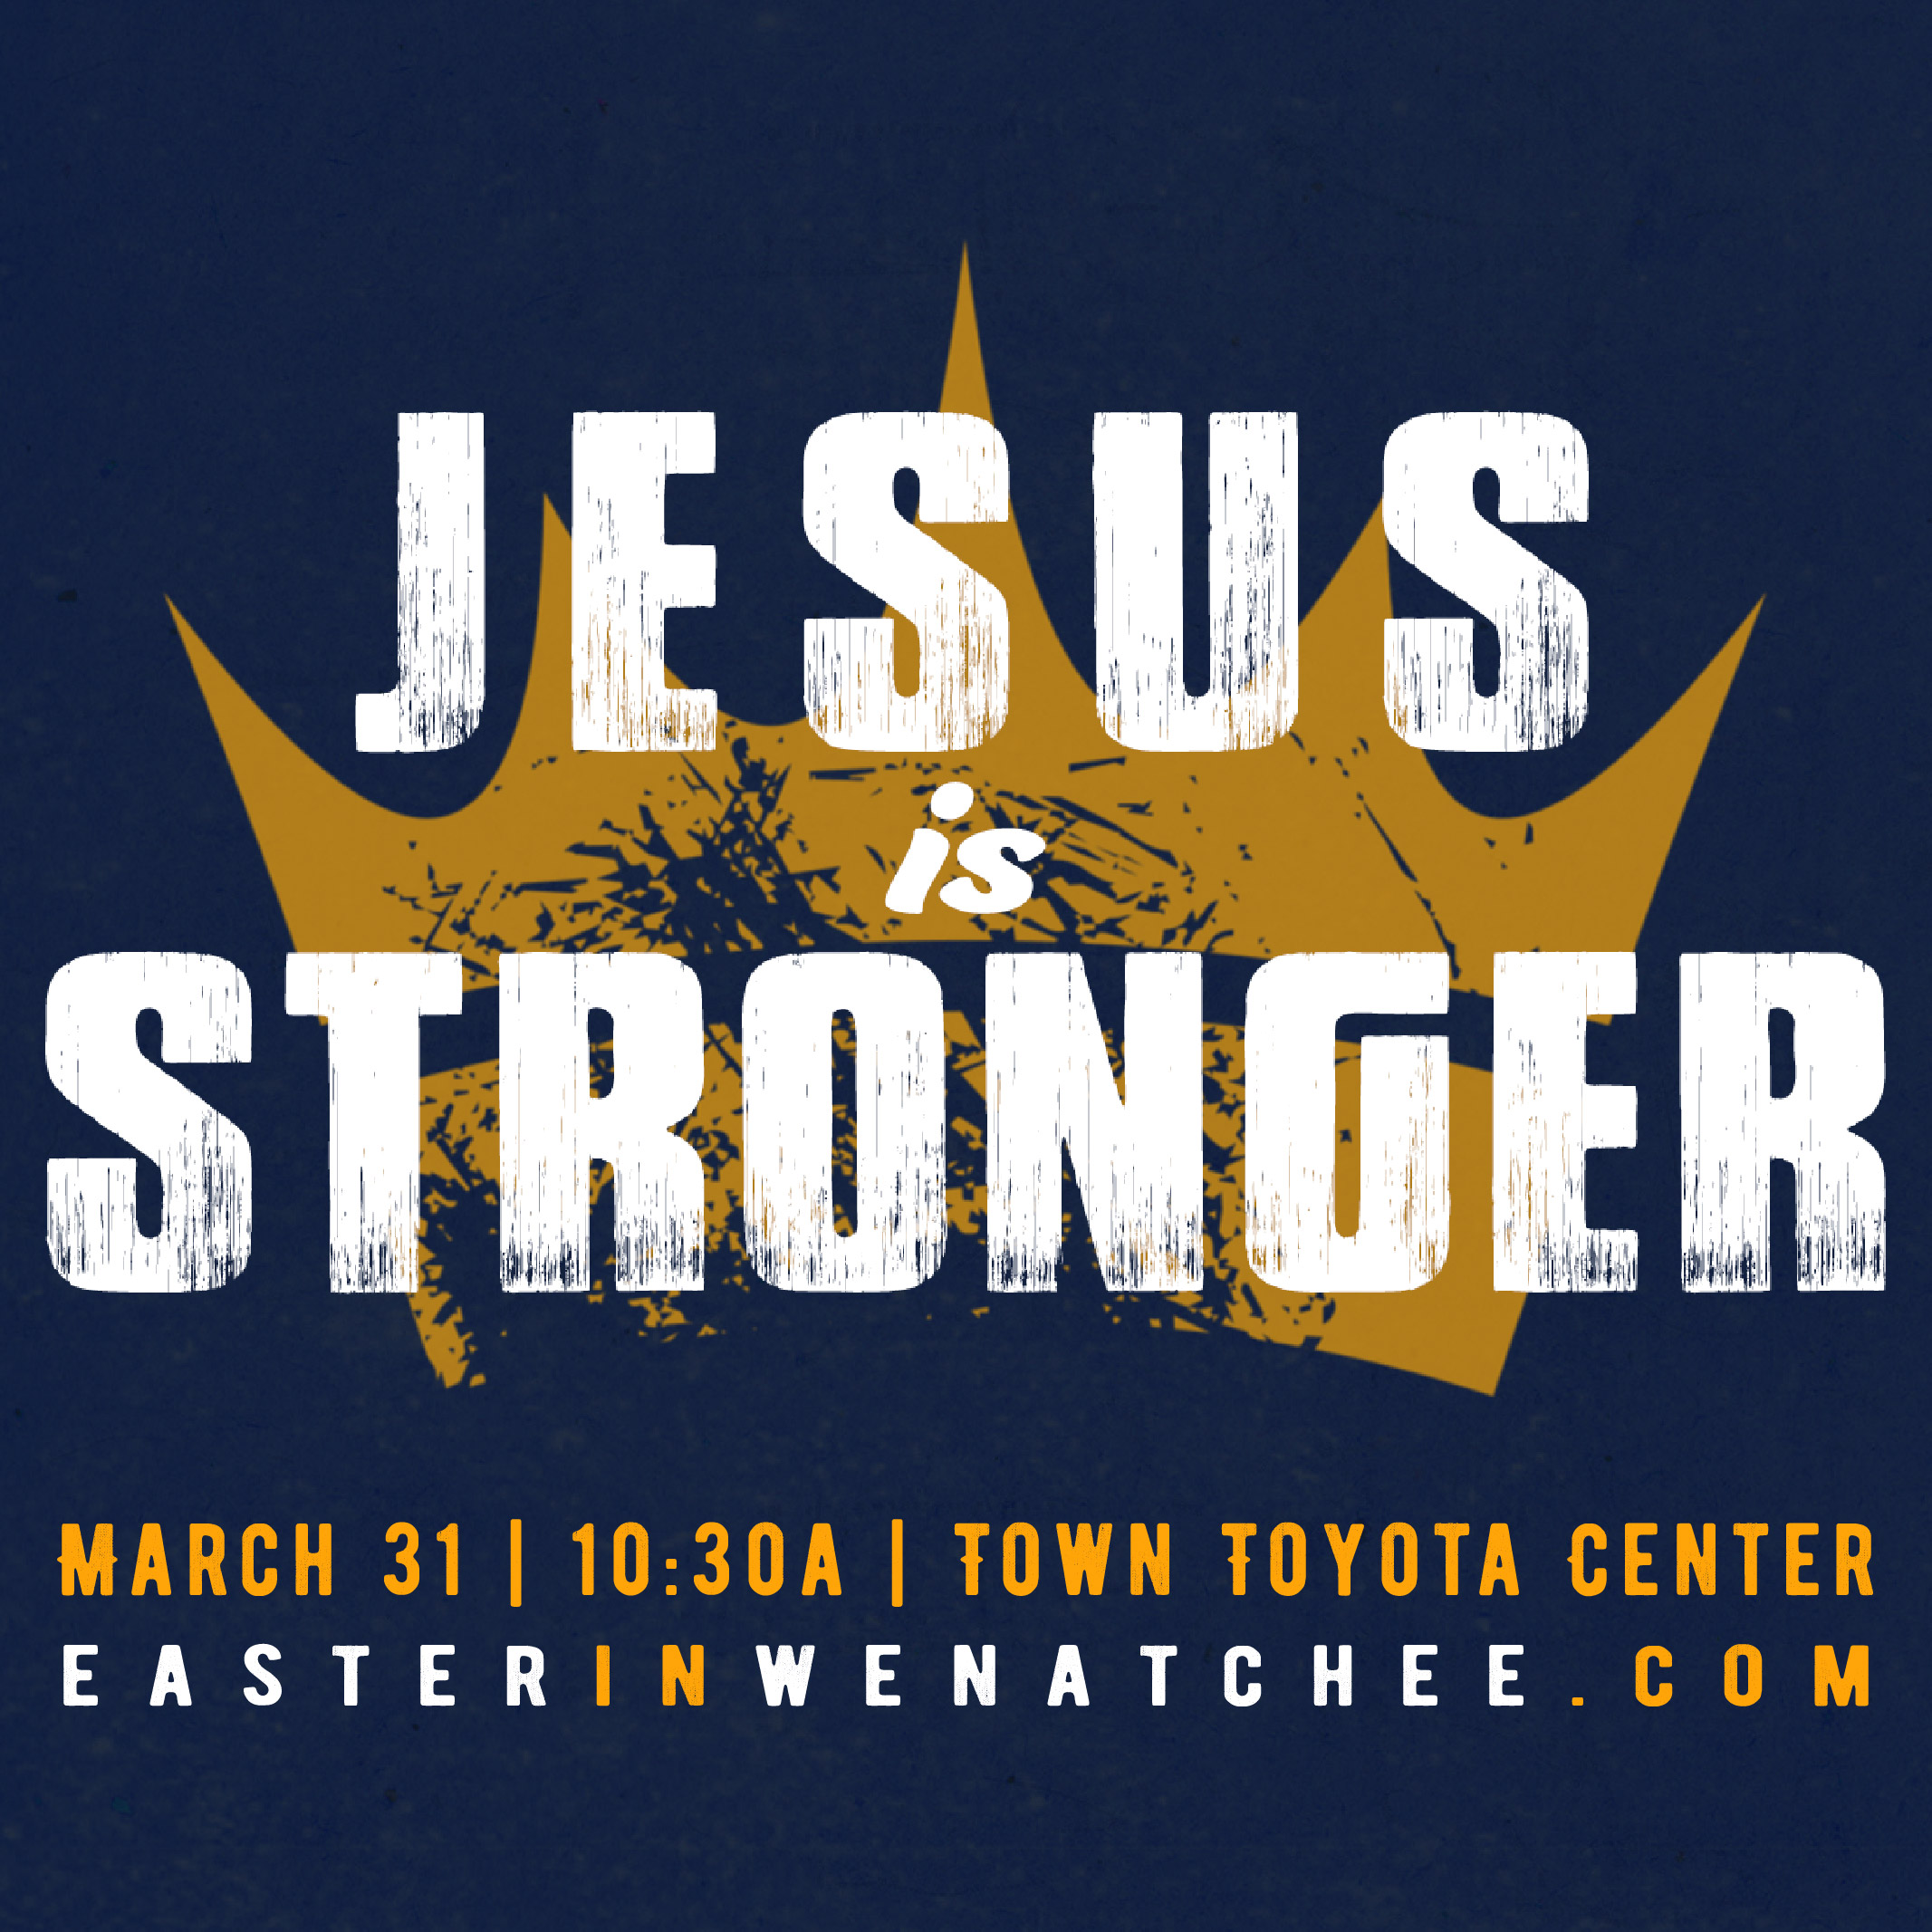 <h1 class="tribe-events-single-event-title">Easter At Town Toyota Center</h1>